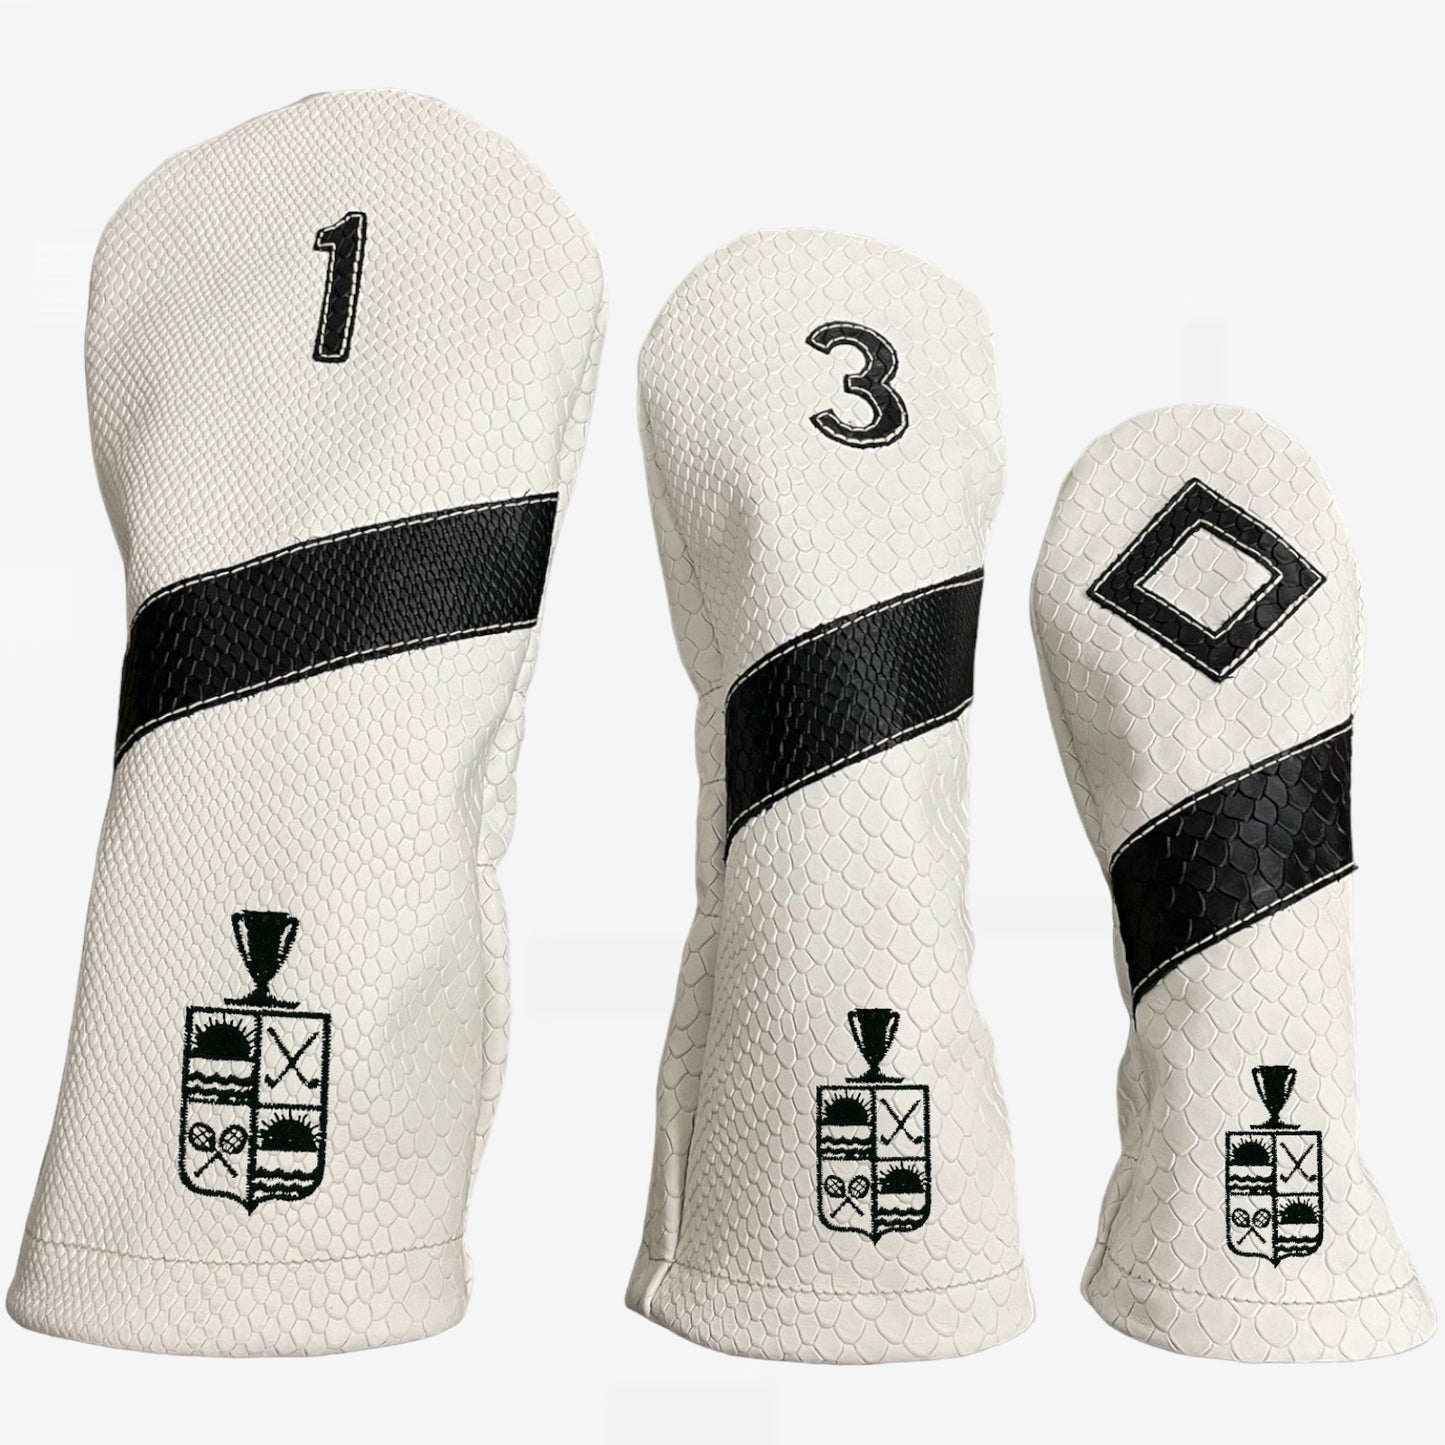 Moraine Member Only Headcovers 04